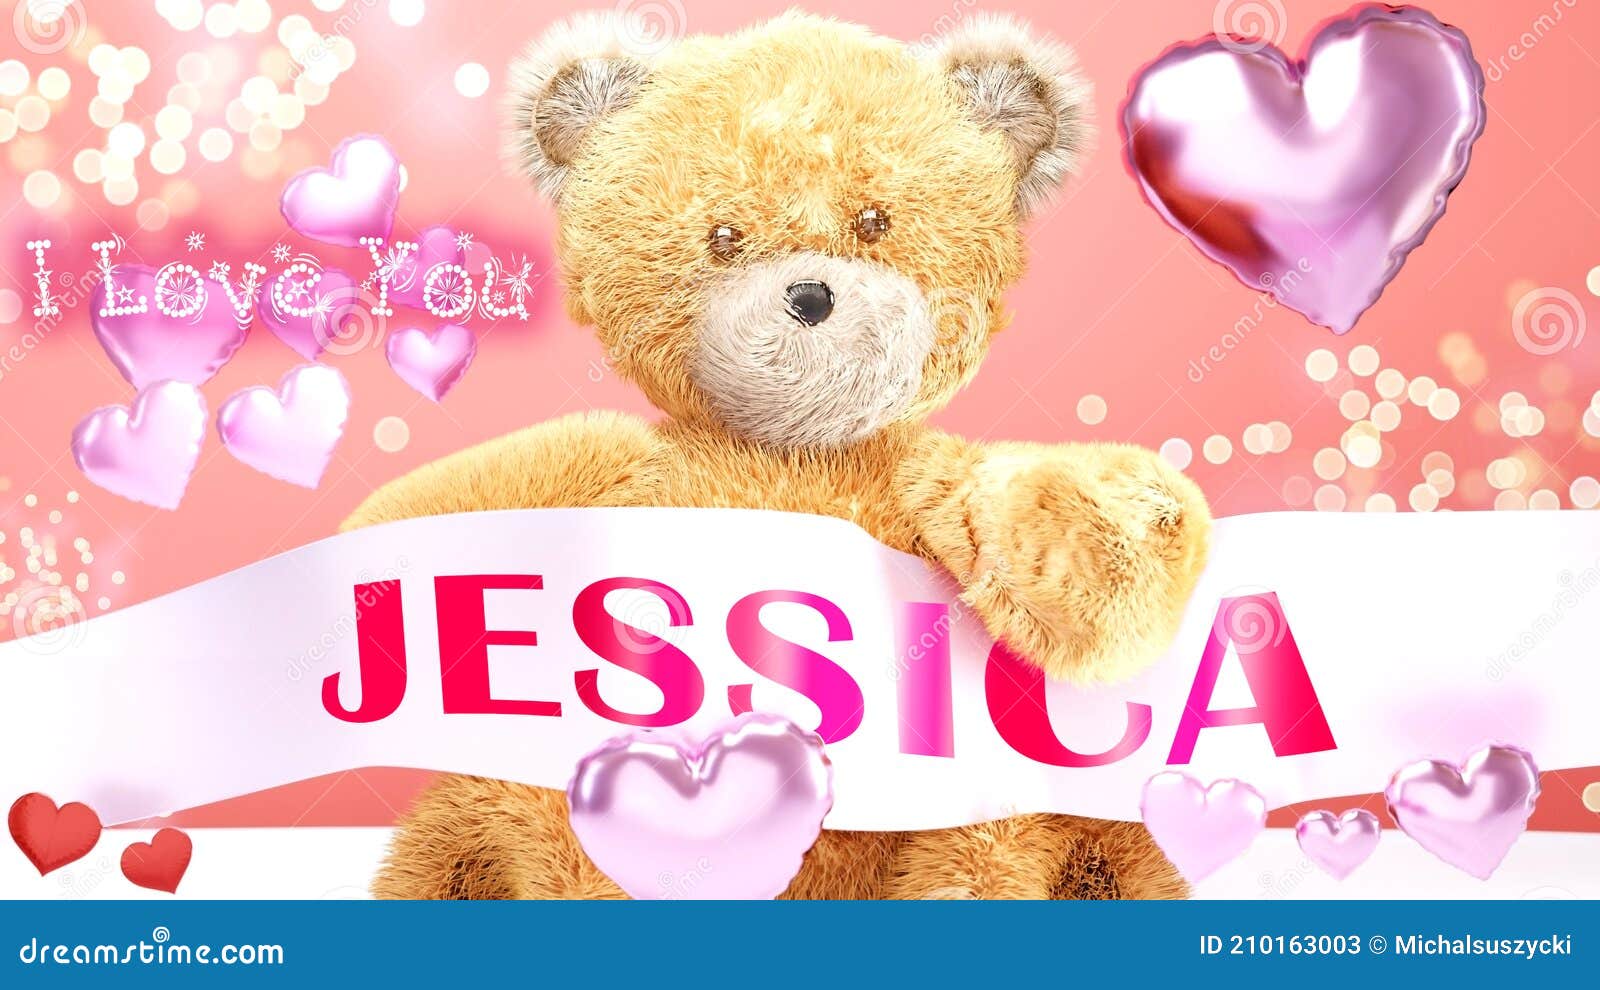 I Love You Jessica - Teddy Bear on a Wedding, Valentine`s or Just ...